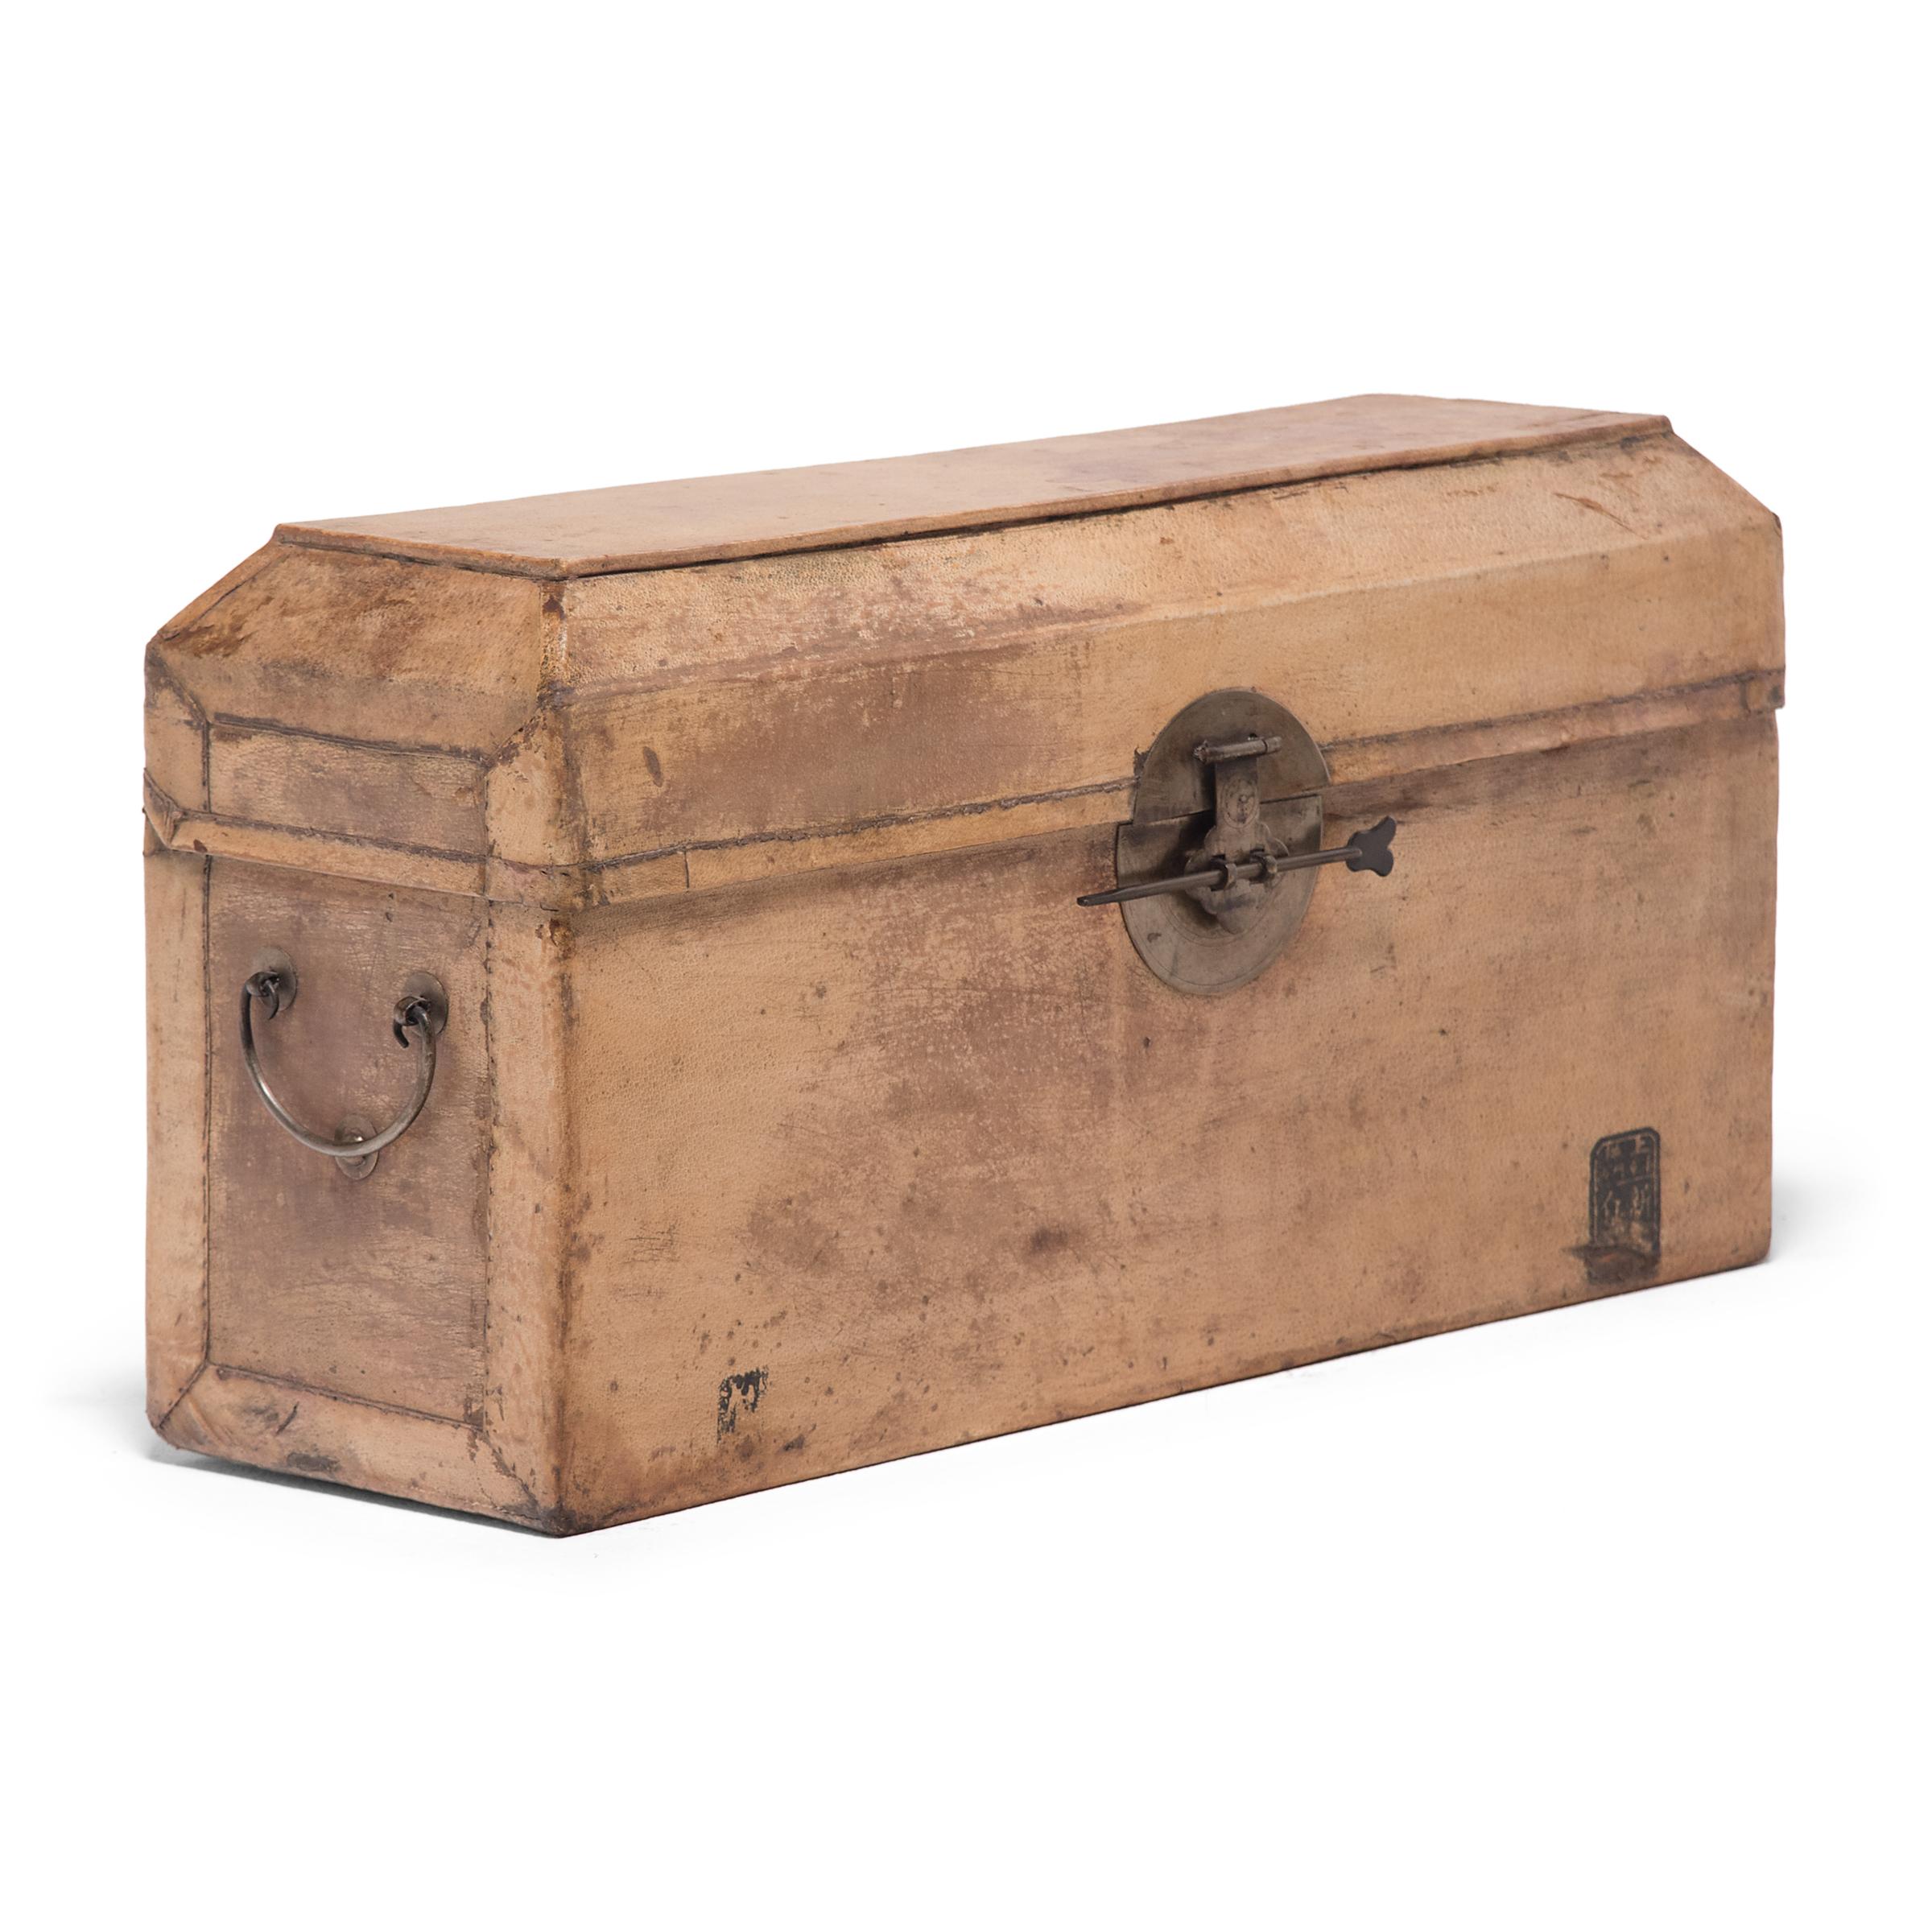 This gorgeous document box once sat in the studio of a Qing-dynasty scholar-official, used to store and protect his works of fine calligraphy and landscape painting. The box is minimally decorated, wrapped in a layer of light brown pig's hide with